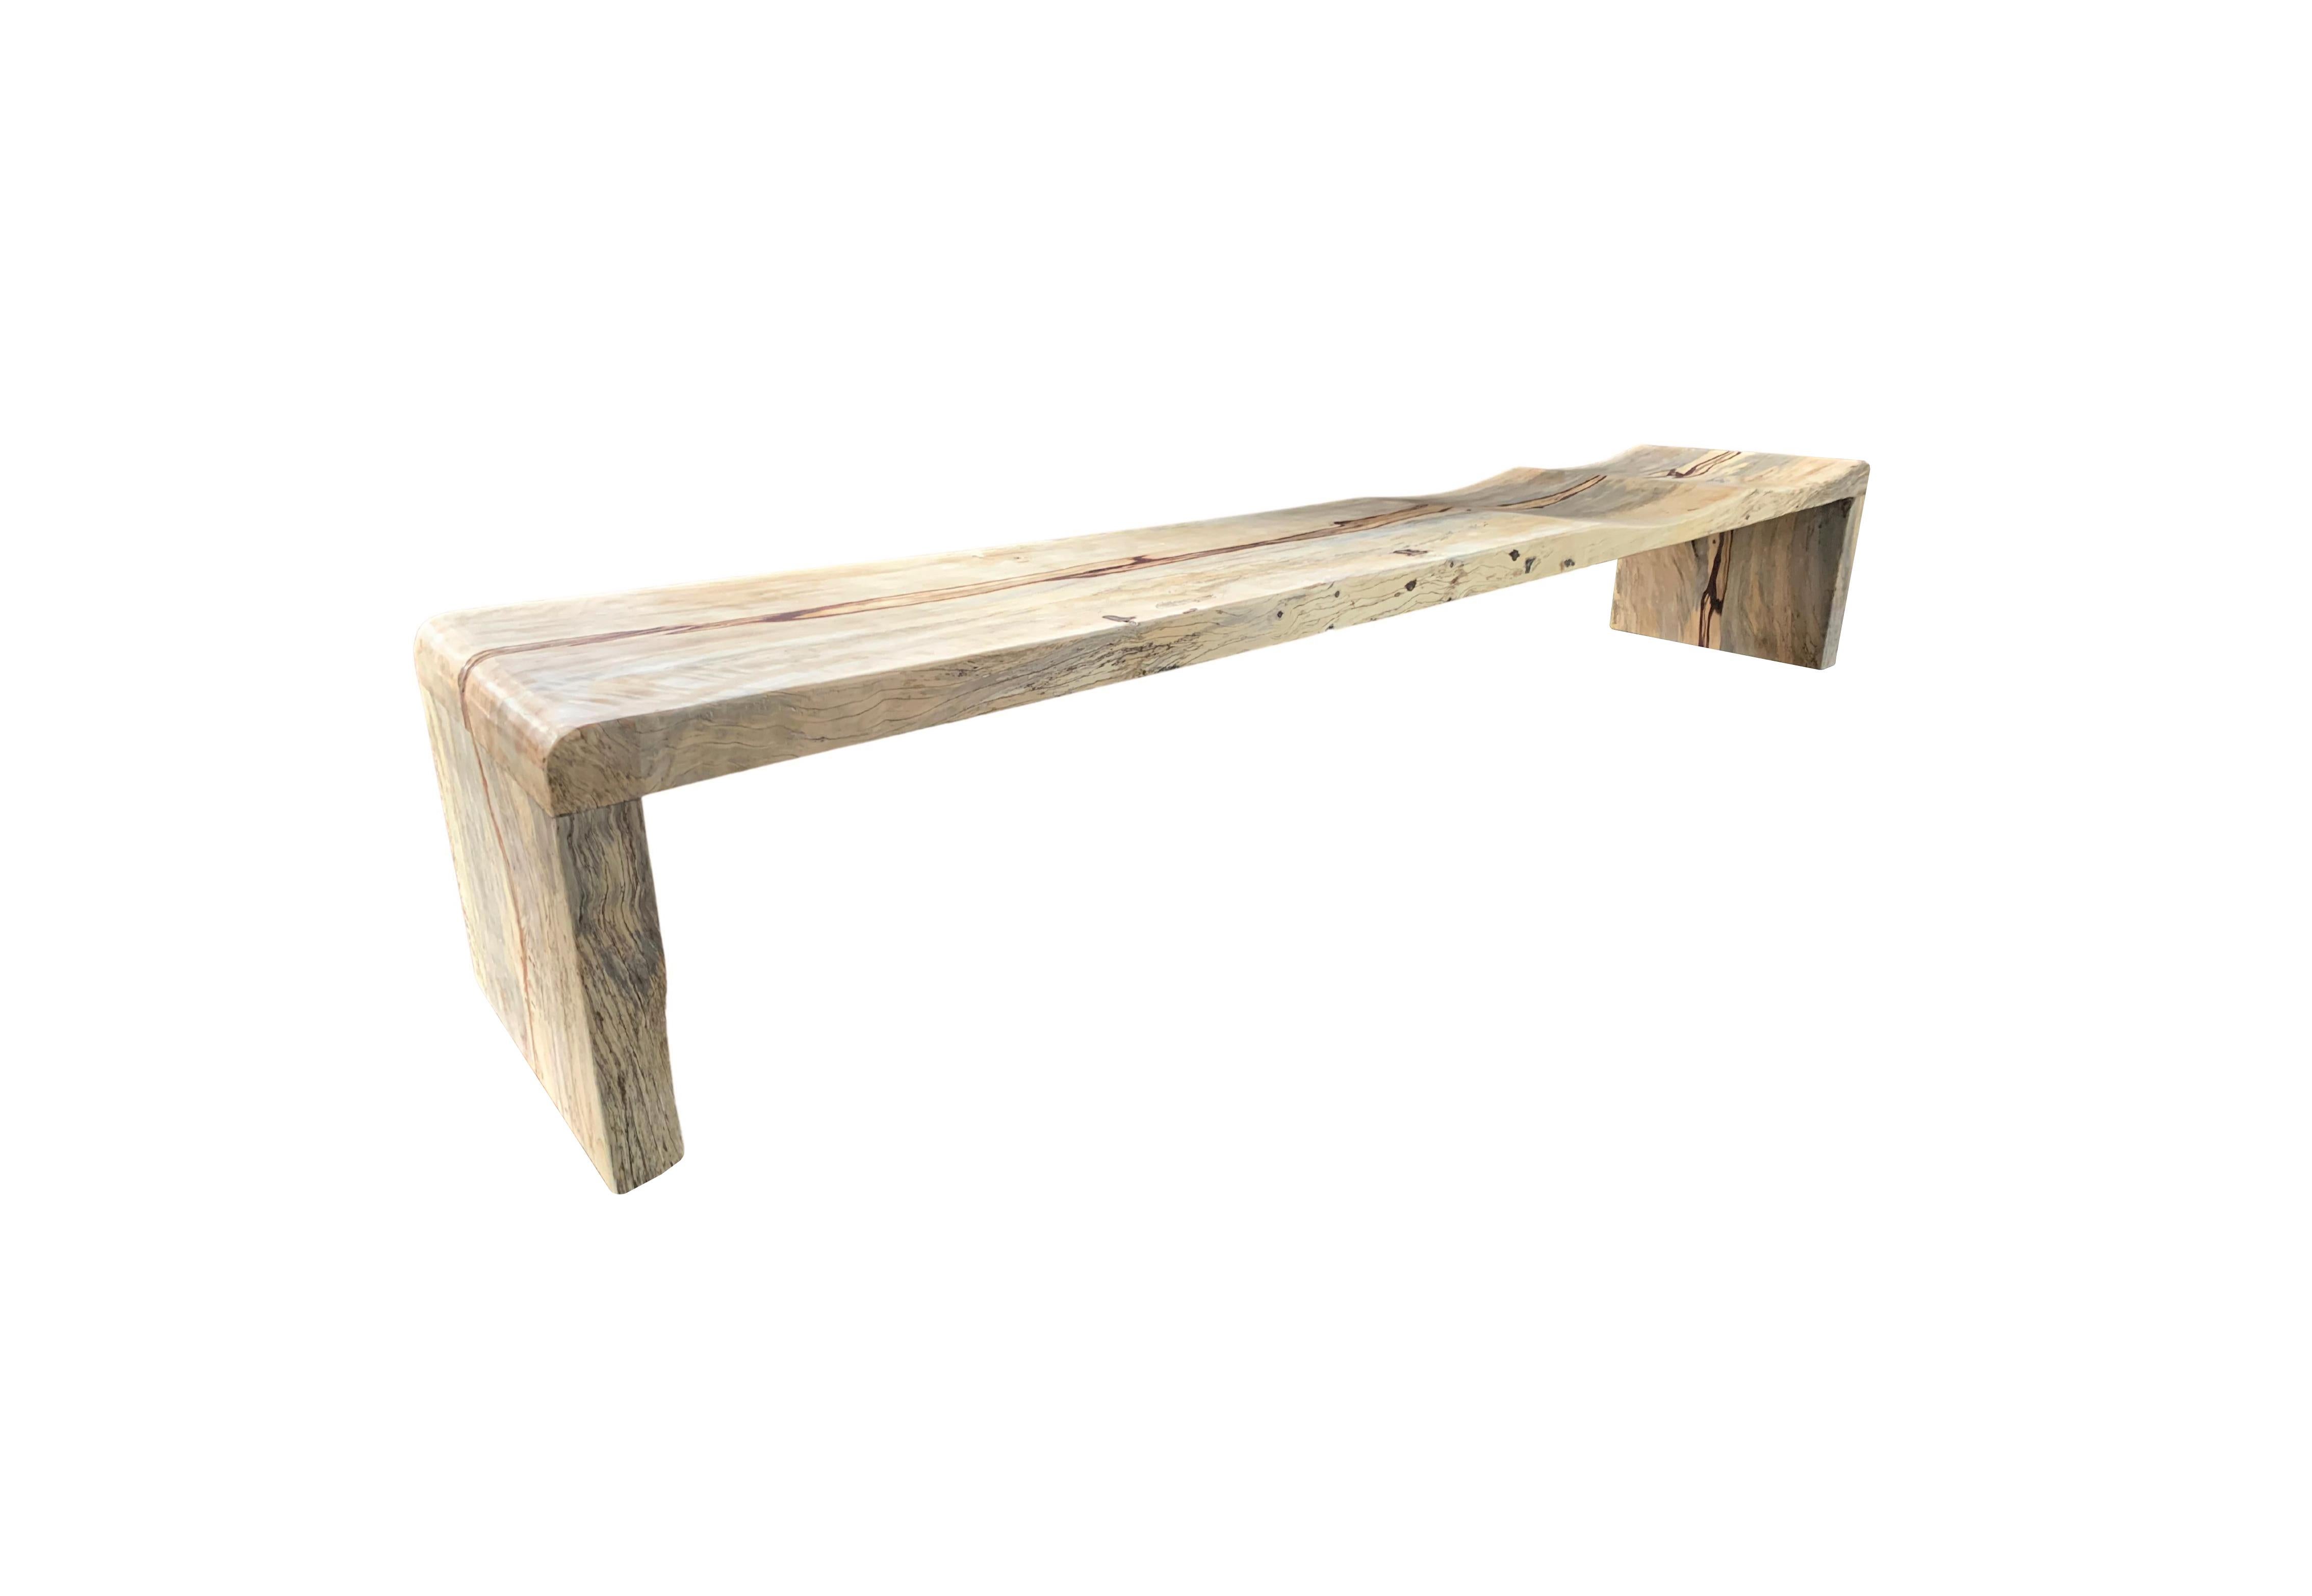 A sculptural hand-carved tamarind wood bench. The mix of curved and straight lines along with a myriad of textures make for a very elegant bench. Unique to this bench is the wood textures that resemble marble. One end of this bench features two